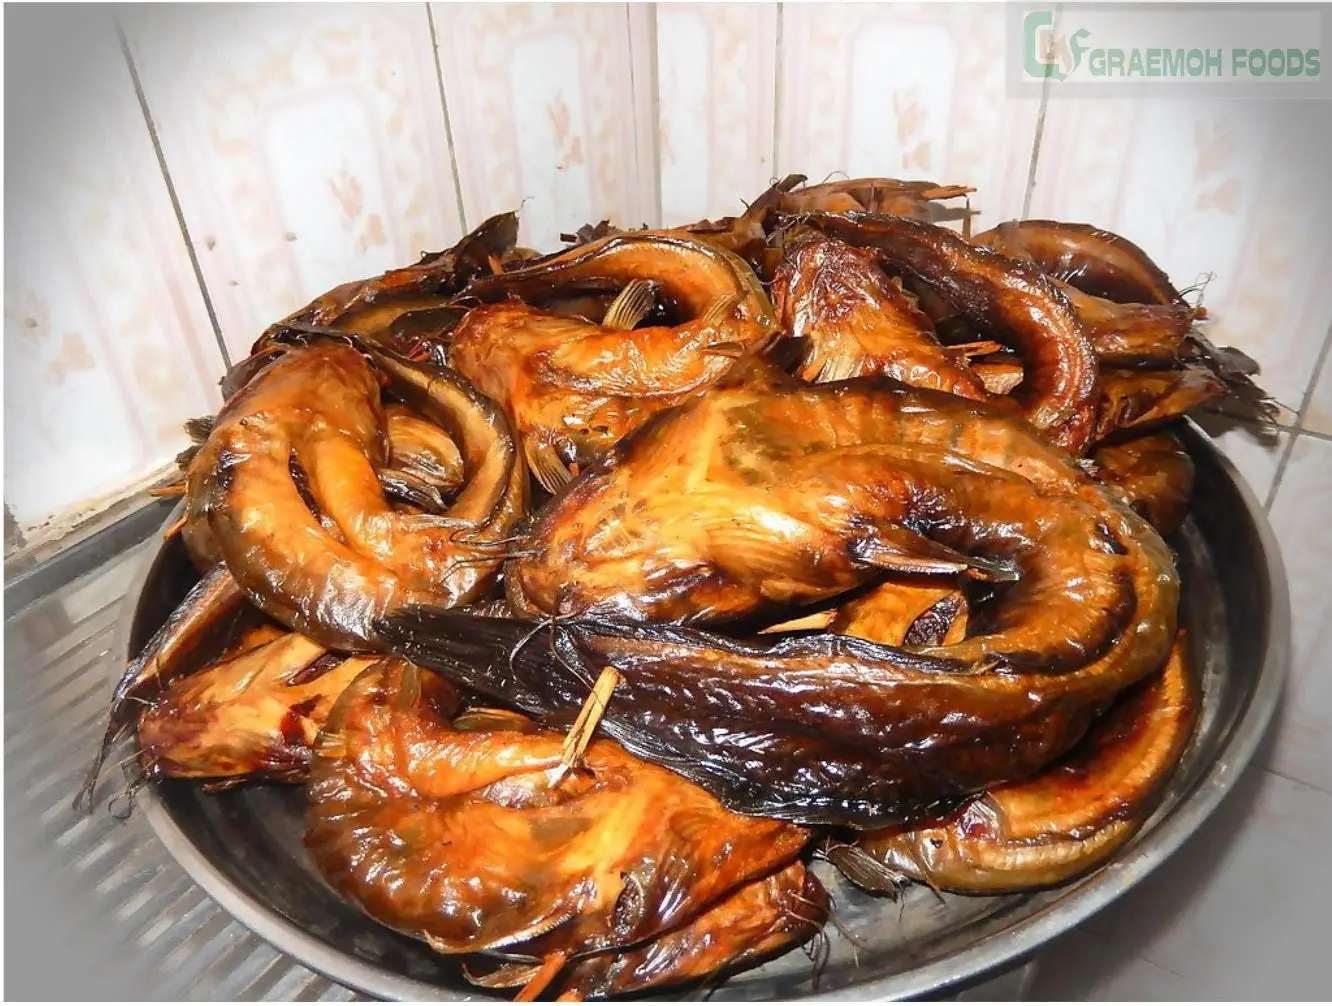 smoked fish in nigeria - What fish is popular in Nigeria